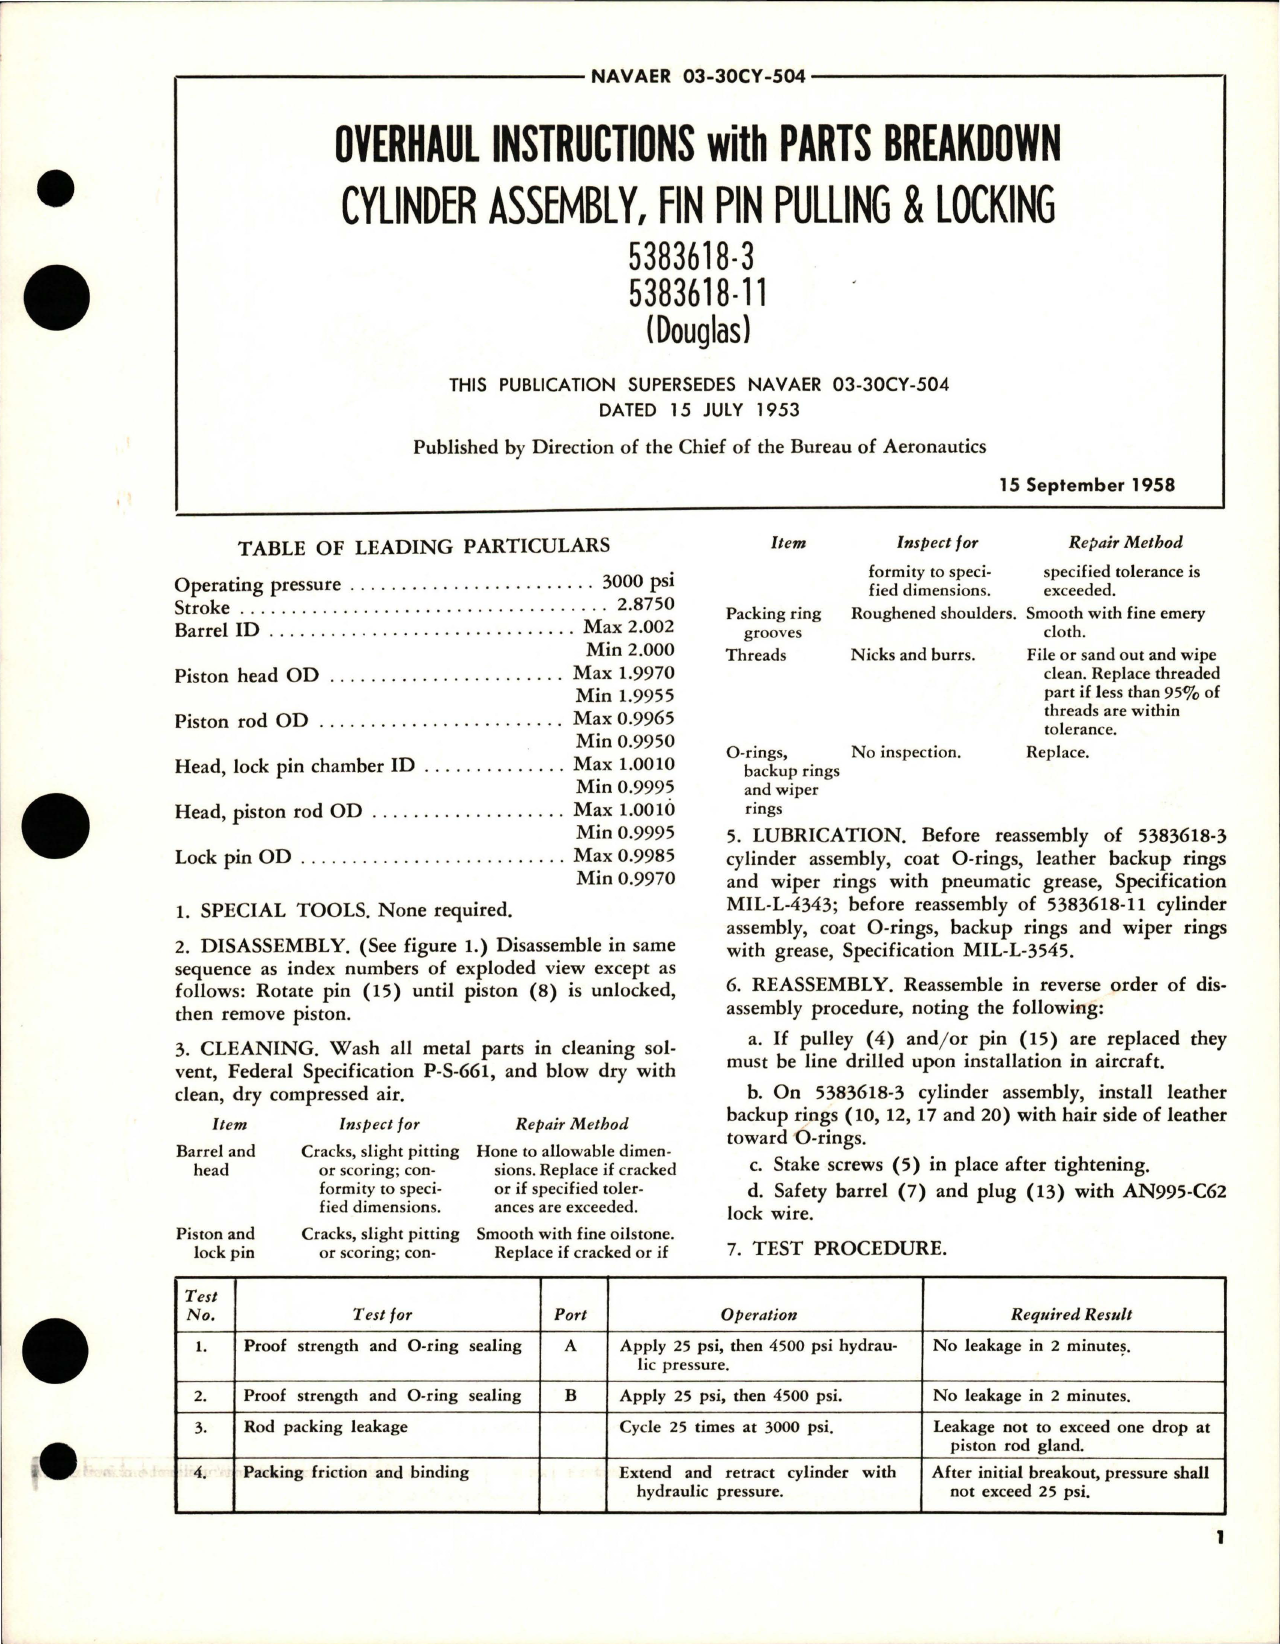 Sample page 1 from AirCorps Library document: Overhaul Instructions with Parts for Fin Pin Pulling and Locking Cylinder Assembly - 5383618-3 and 5383618-11